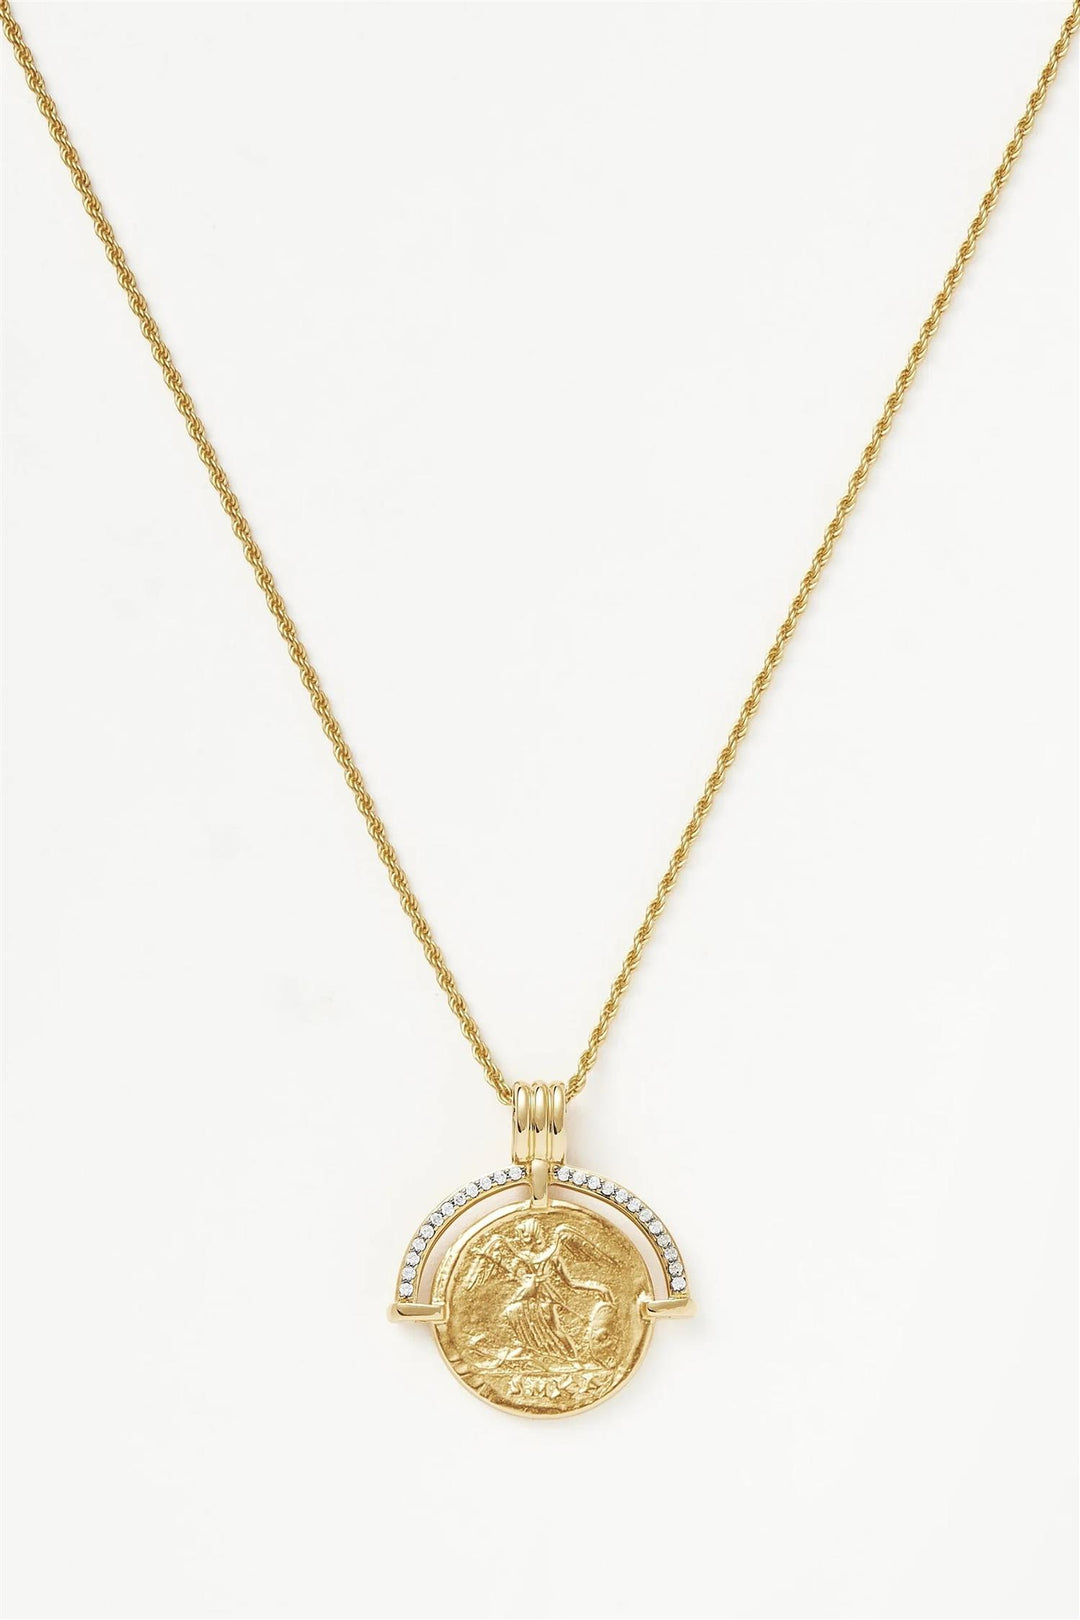 Lucy Williams Fortuna Arc Coin Pendant Necklace